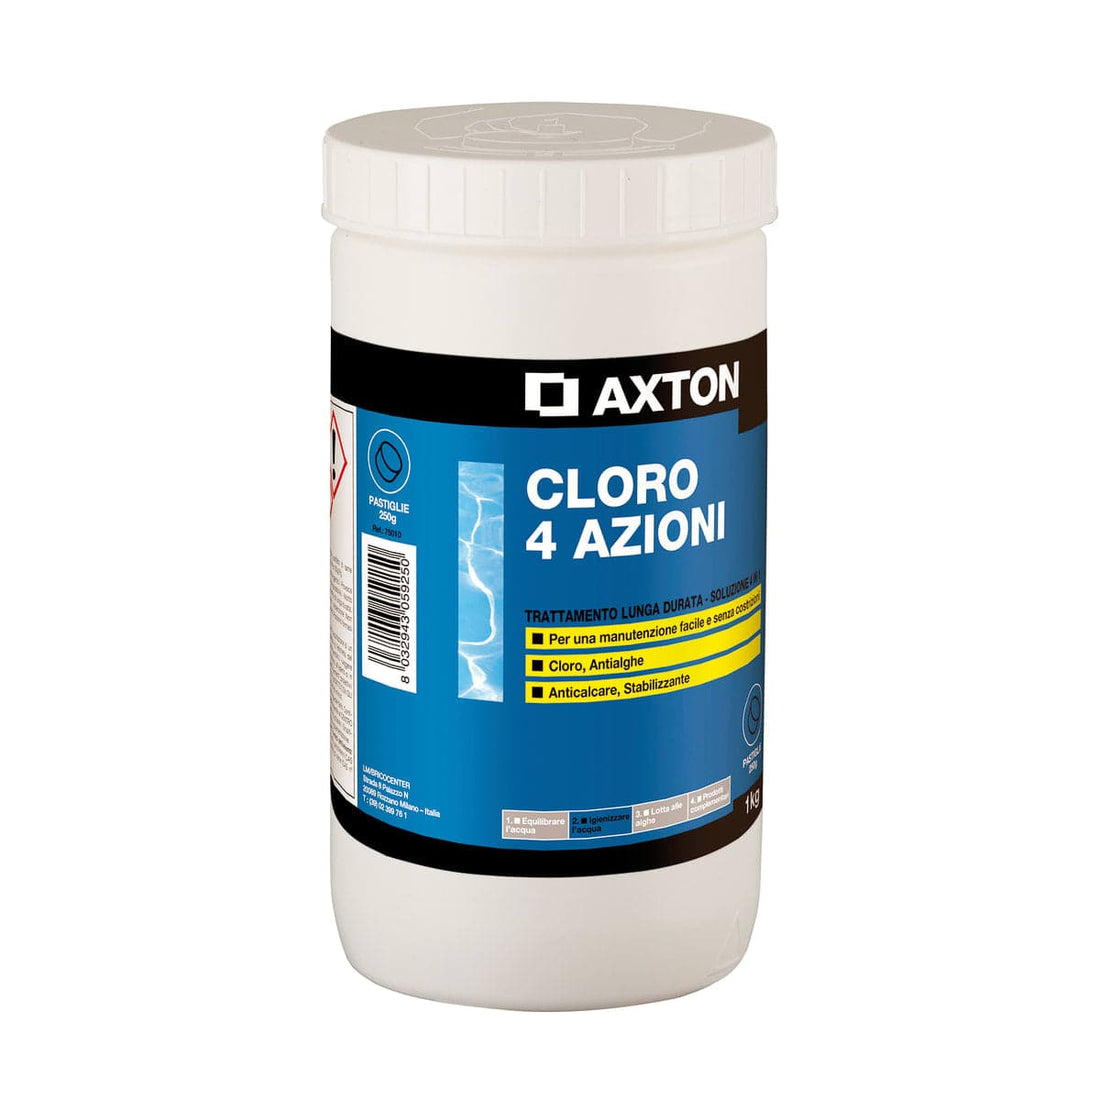 4-ACTION TREATMENT FOR SWIMMING POOLS 1KG 250G TABLETS - best price from Maltashopper.com BR500710015